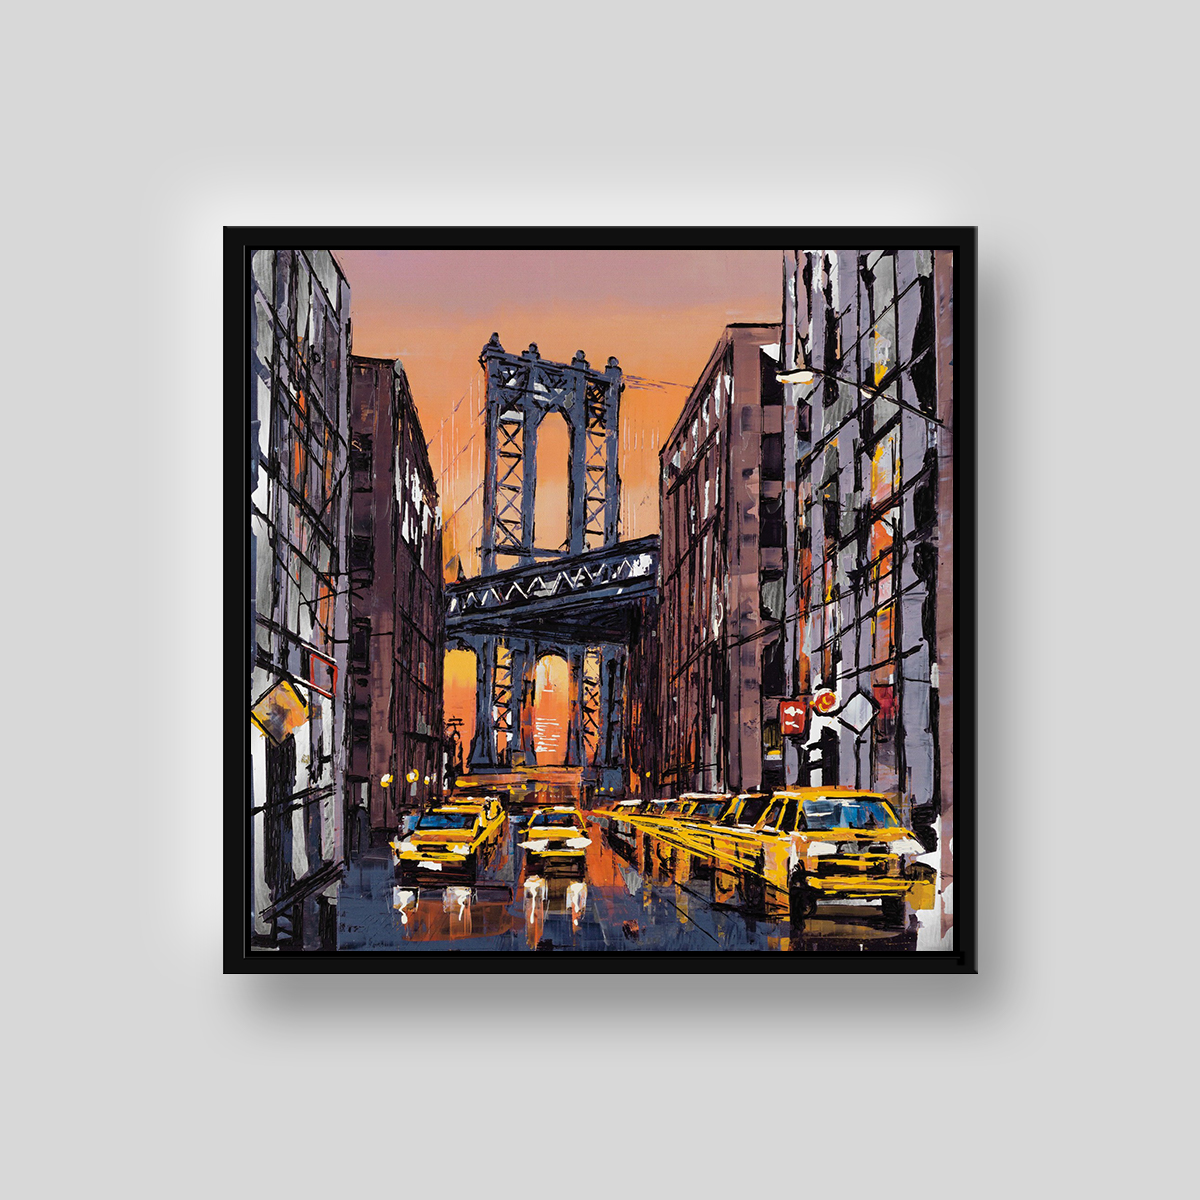 Liquid Sky by Paul Kenton, UK contemporary cityscape artist, a limited edition print from his New York Collection